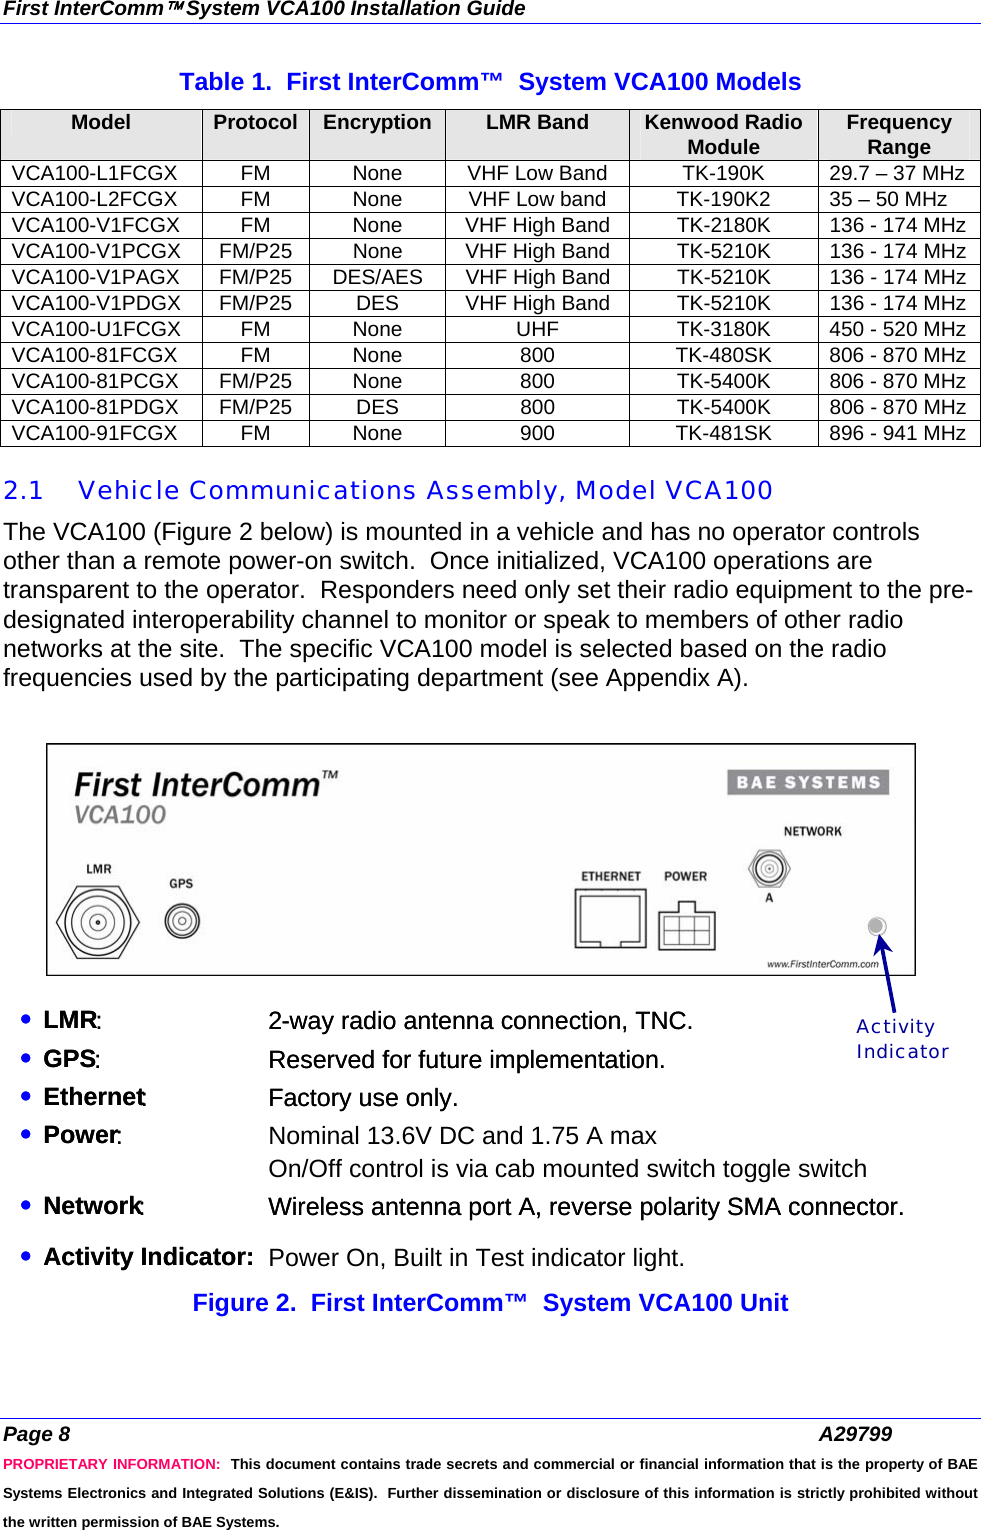 First InterComm™ System VCA100 Installation Guide Page 8  A29799 PROPRIETARY INFORMATION:  This document contains trade secrets and commercial or financial information that is the property of BAE Systems Electronics and Integrated Solutions (E&amp;IS).  Further dissemination or disclosure of this information is strictly prohibited without the written permission of BAE Systems. Table 1.  First InterComm™  System VCA100 Models Model  Protocol  Encryption  LMR Band  Kenwood Radio Module  Frequency Range VCA100-L1FCGX  FM  None  VHF Low Band  TK-190K  29.7 – 37 MHz VCA100-L2FCGX  FM  None  VHF Low band  TK-190K2  35 – 50 MHz VCA100-V1FCGX  FM  None  VHF High Band  TK-2180K  136 - 174 MHz VCA100-V1PCGX  FM/P25  None  VHF High Band  TK-5210K  136 - 174 MHz VCA100-V1PAGX  FM/P25  DES/AES  VHF High Band  TK-5210K  136 - 174 MHz VCA100-V1PDGX  FM/P25  DES  VHF High Band  TK-5210K  136 - 174 MHz VCA100-U1FCGX  FM  None  UHF  TK-3180K  450 - 520 MHz VCA100-81FCGX  FM  None  800  TK-480SK  806 - 870 MHz VCA100-81PCGX  FM/P25  None  800  TK-5400K  806 - 870 MHz VCA100-81PDGX  FM/P25  DES  800  TK-5400K  806 - 870 MHz VCA100-91FCGX  FM  None  900  TK-481SK  896 - 941 MHz  2.1 Vehicle Communications Assembly, Model VCA100  The VCA100 (Figure 2 below) is mounted in a vehicle and has no operator controls other than a remote power-on switch.  Once initialized, VCA100 operations are transparent to the operator.  Responders need only set their radio equipment to the pre-designated interoperability channel to monitor or speak to members of other radio networks at the site.  The specific VCA100 model is selected based on the radio frequencies used by the participating department (see Appendix A).   Figure 2.  First InterComm™  System VCA100 Unit • LMR : 2 - way radio antenna connection, TNC.• GPS :  Reserved for future implementation.• Ethernet :  Factory use only.• Power :  • Network :  Wireless antenna port A, reverse polarity SMA connector.• Activity Indicator: Power On, Built in Test indicator light.• LMR : 2 - way radio antenna connection, TNC.• GPS :  Reserved for future implementation.• Ethernet :  Factory use only.• Power :  Nominal 13.6V DC and 1.75 A max  • Network :  Wireless antenna port A, reverse polarity SMA connector.• Activity Indicator: ActivityIndicatorOn/Off control is via cab mounted switch toggle switch 